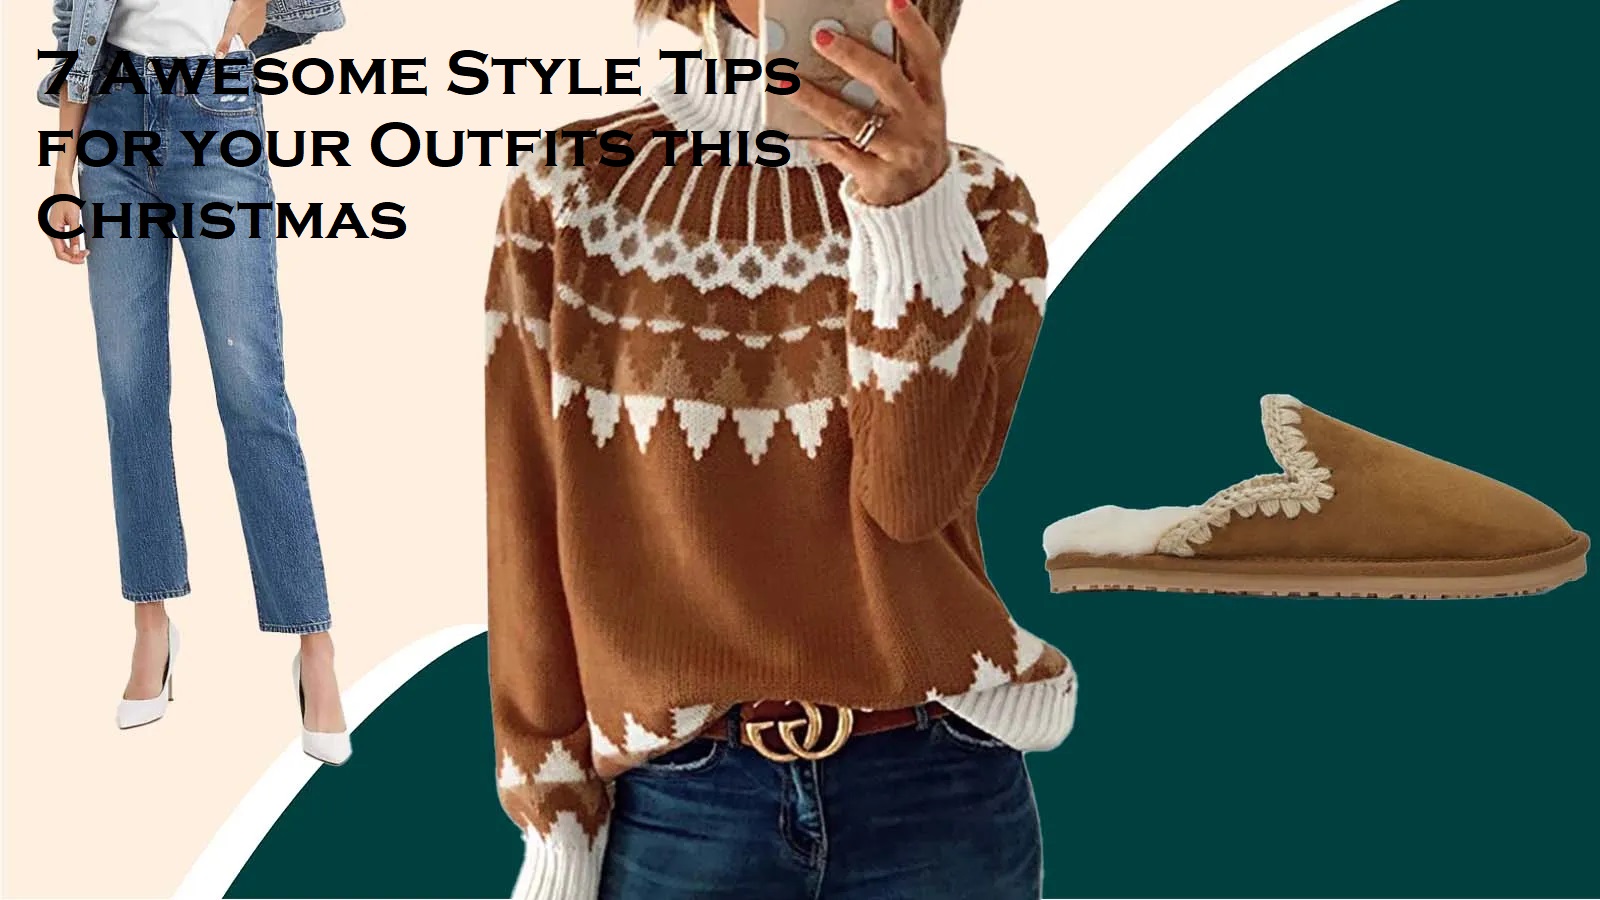 7 Awesome Style Tips for your Outfits this Christmas